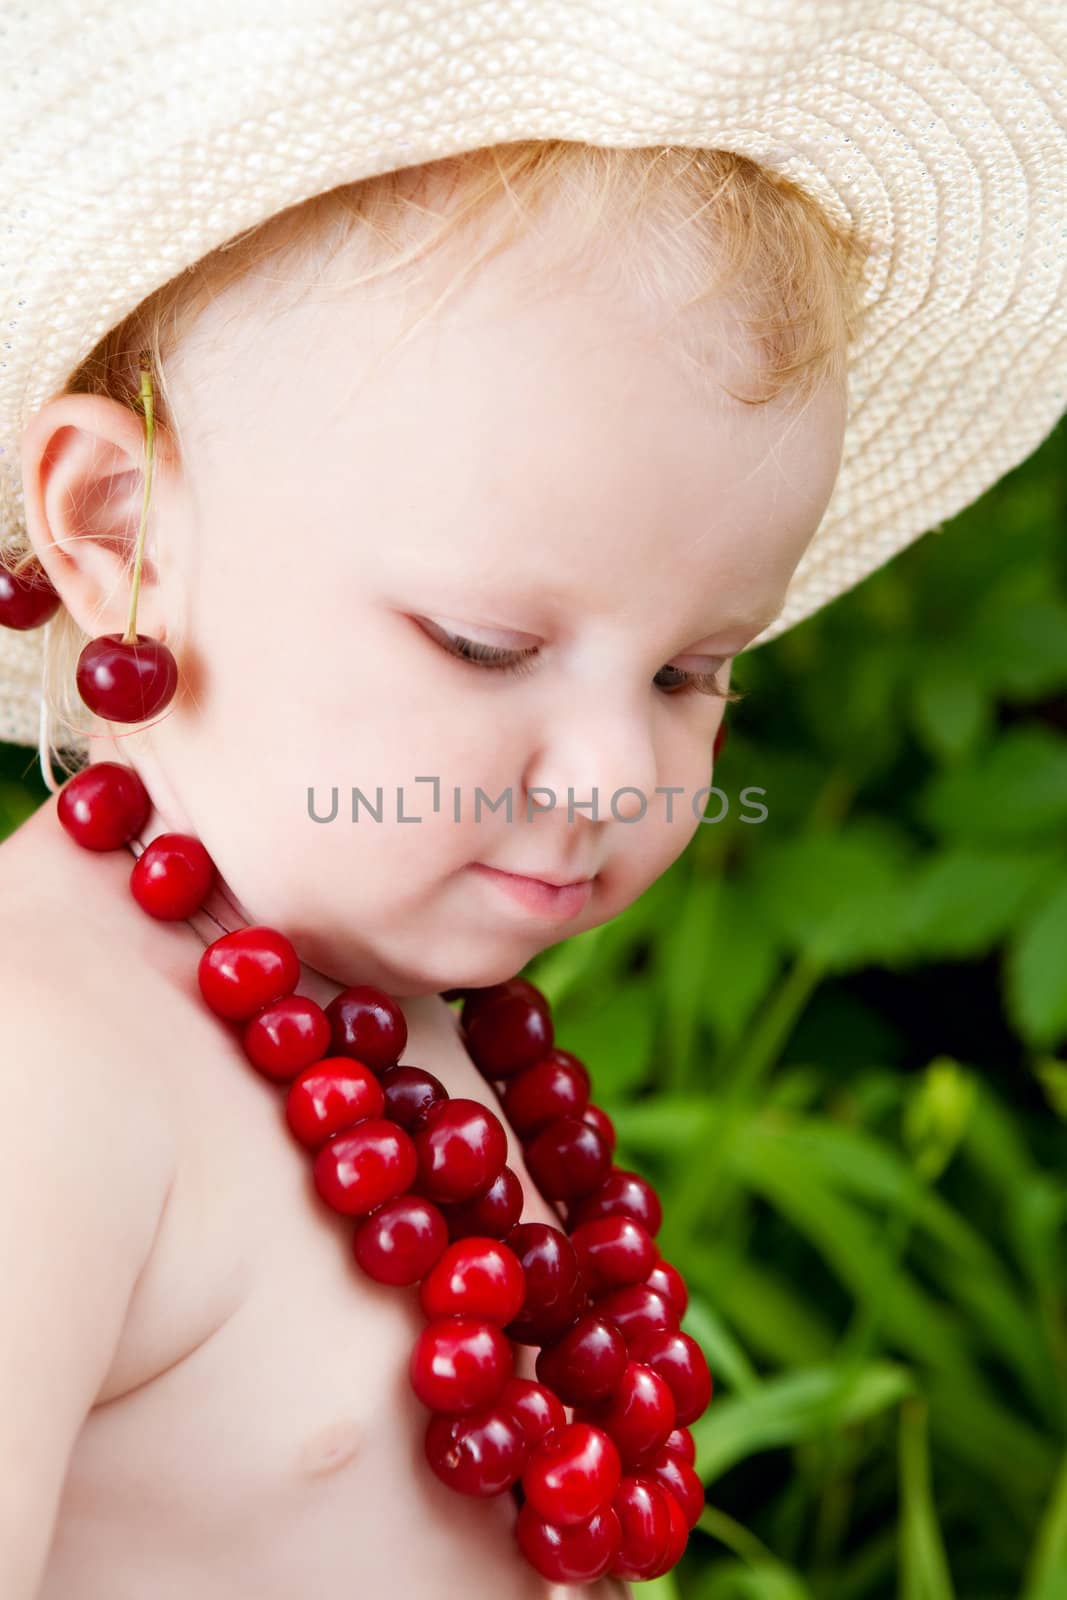 girl and cherries in green leaves background